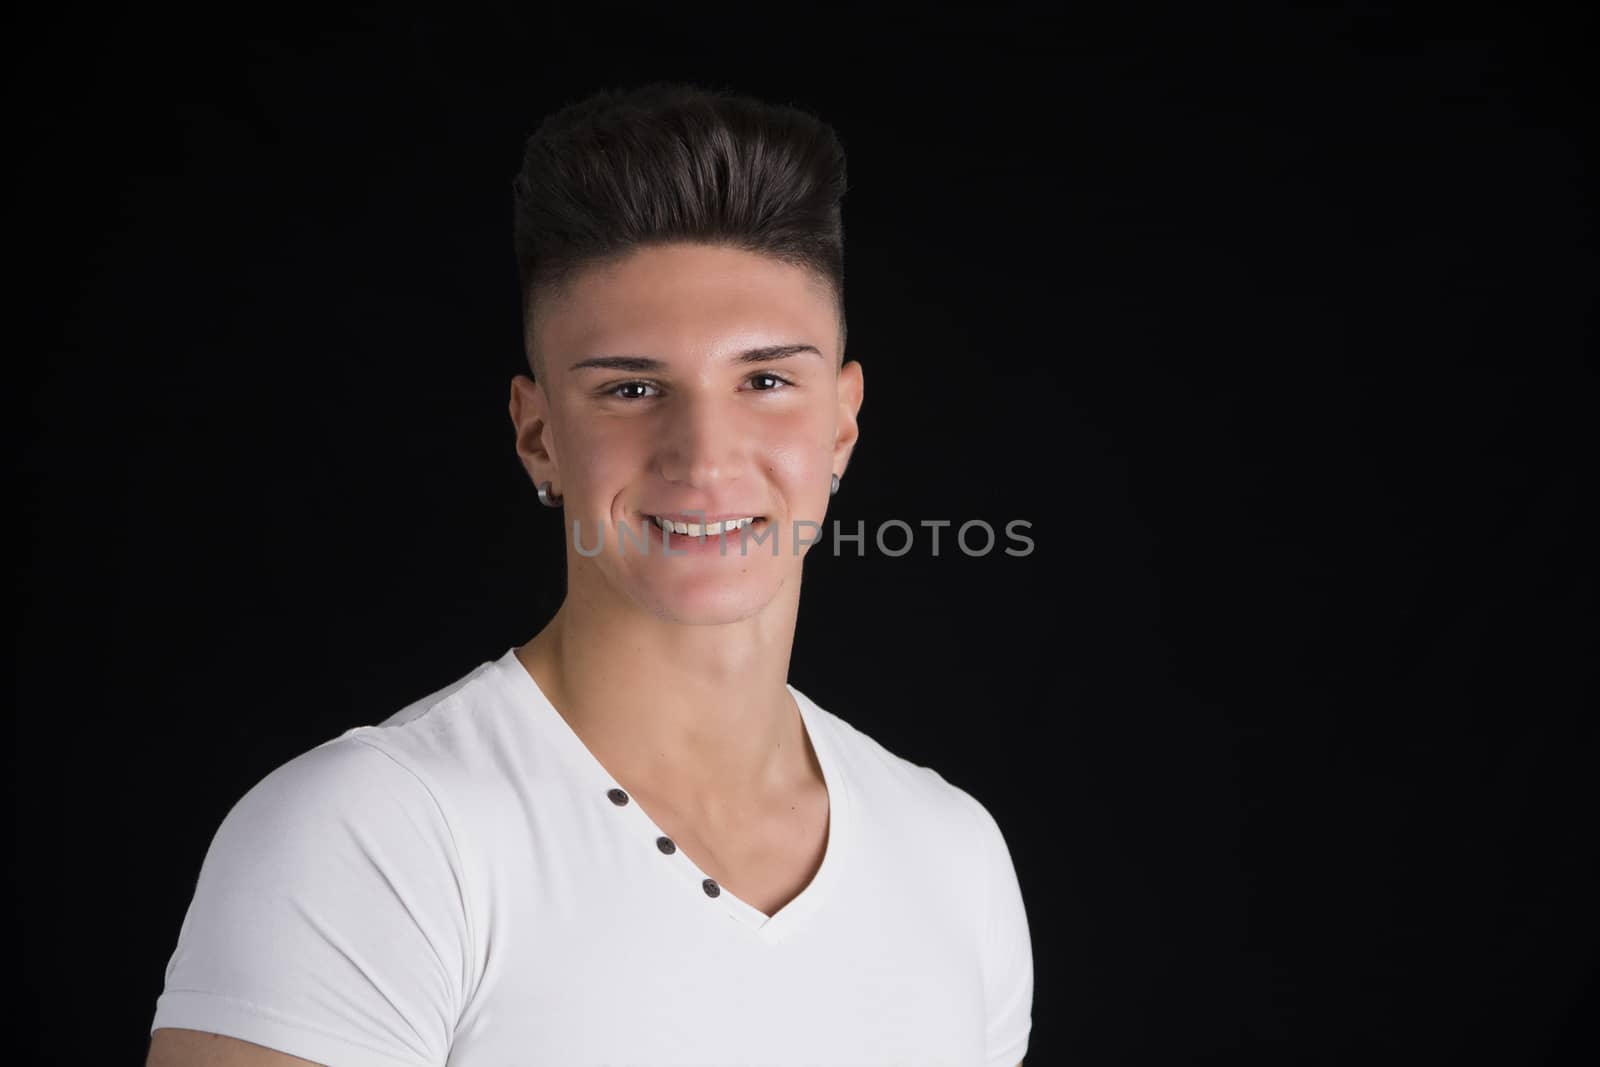 Head and shoulders portrait of smiling handsome young man by artofphoto